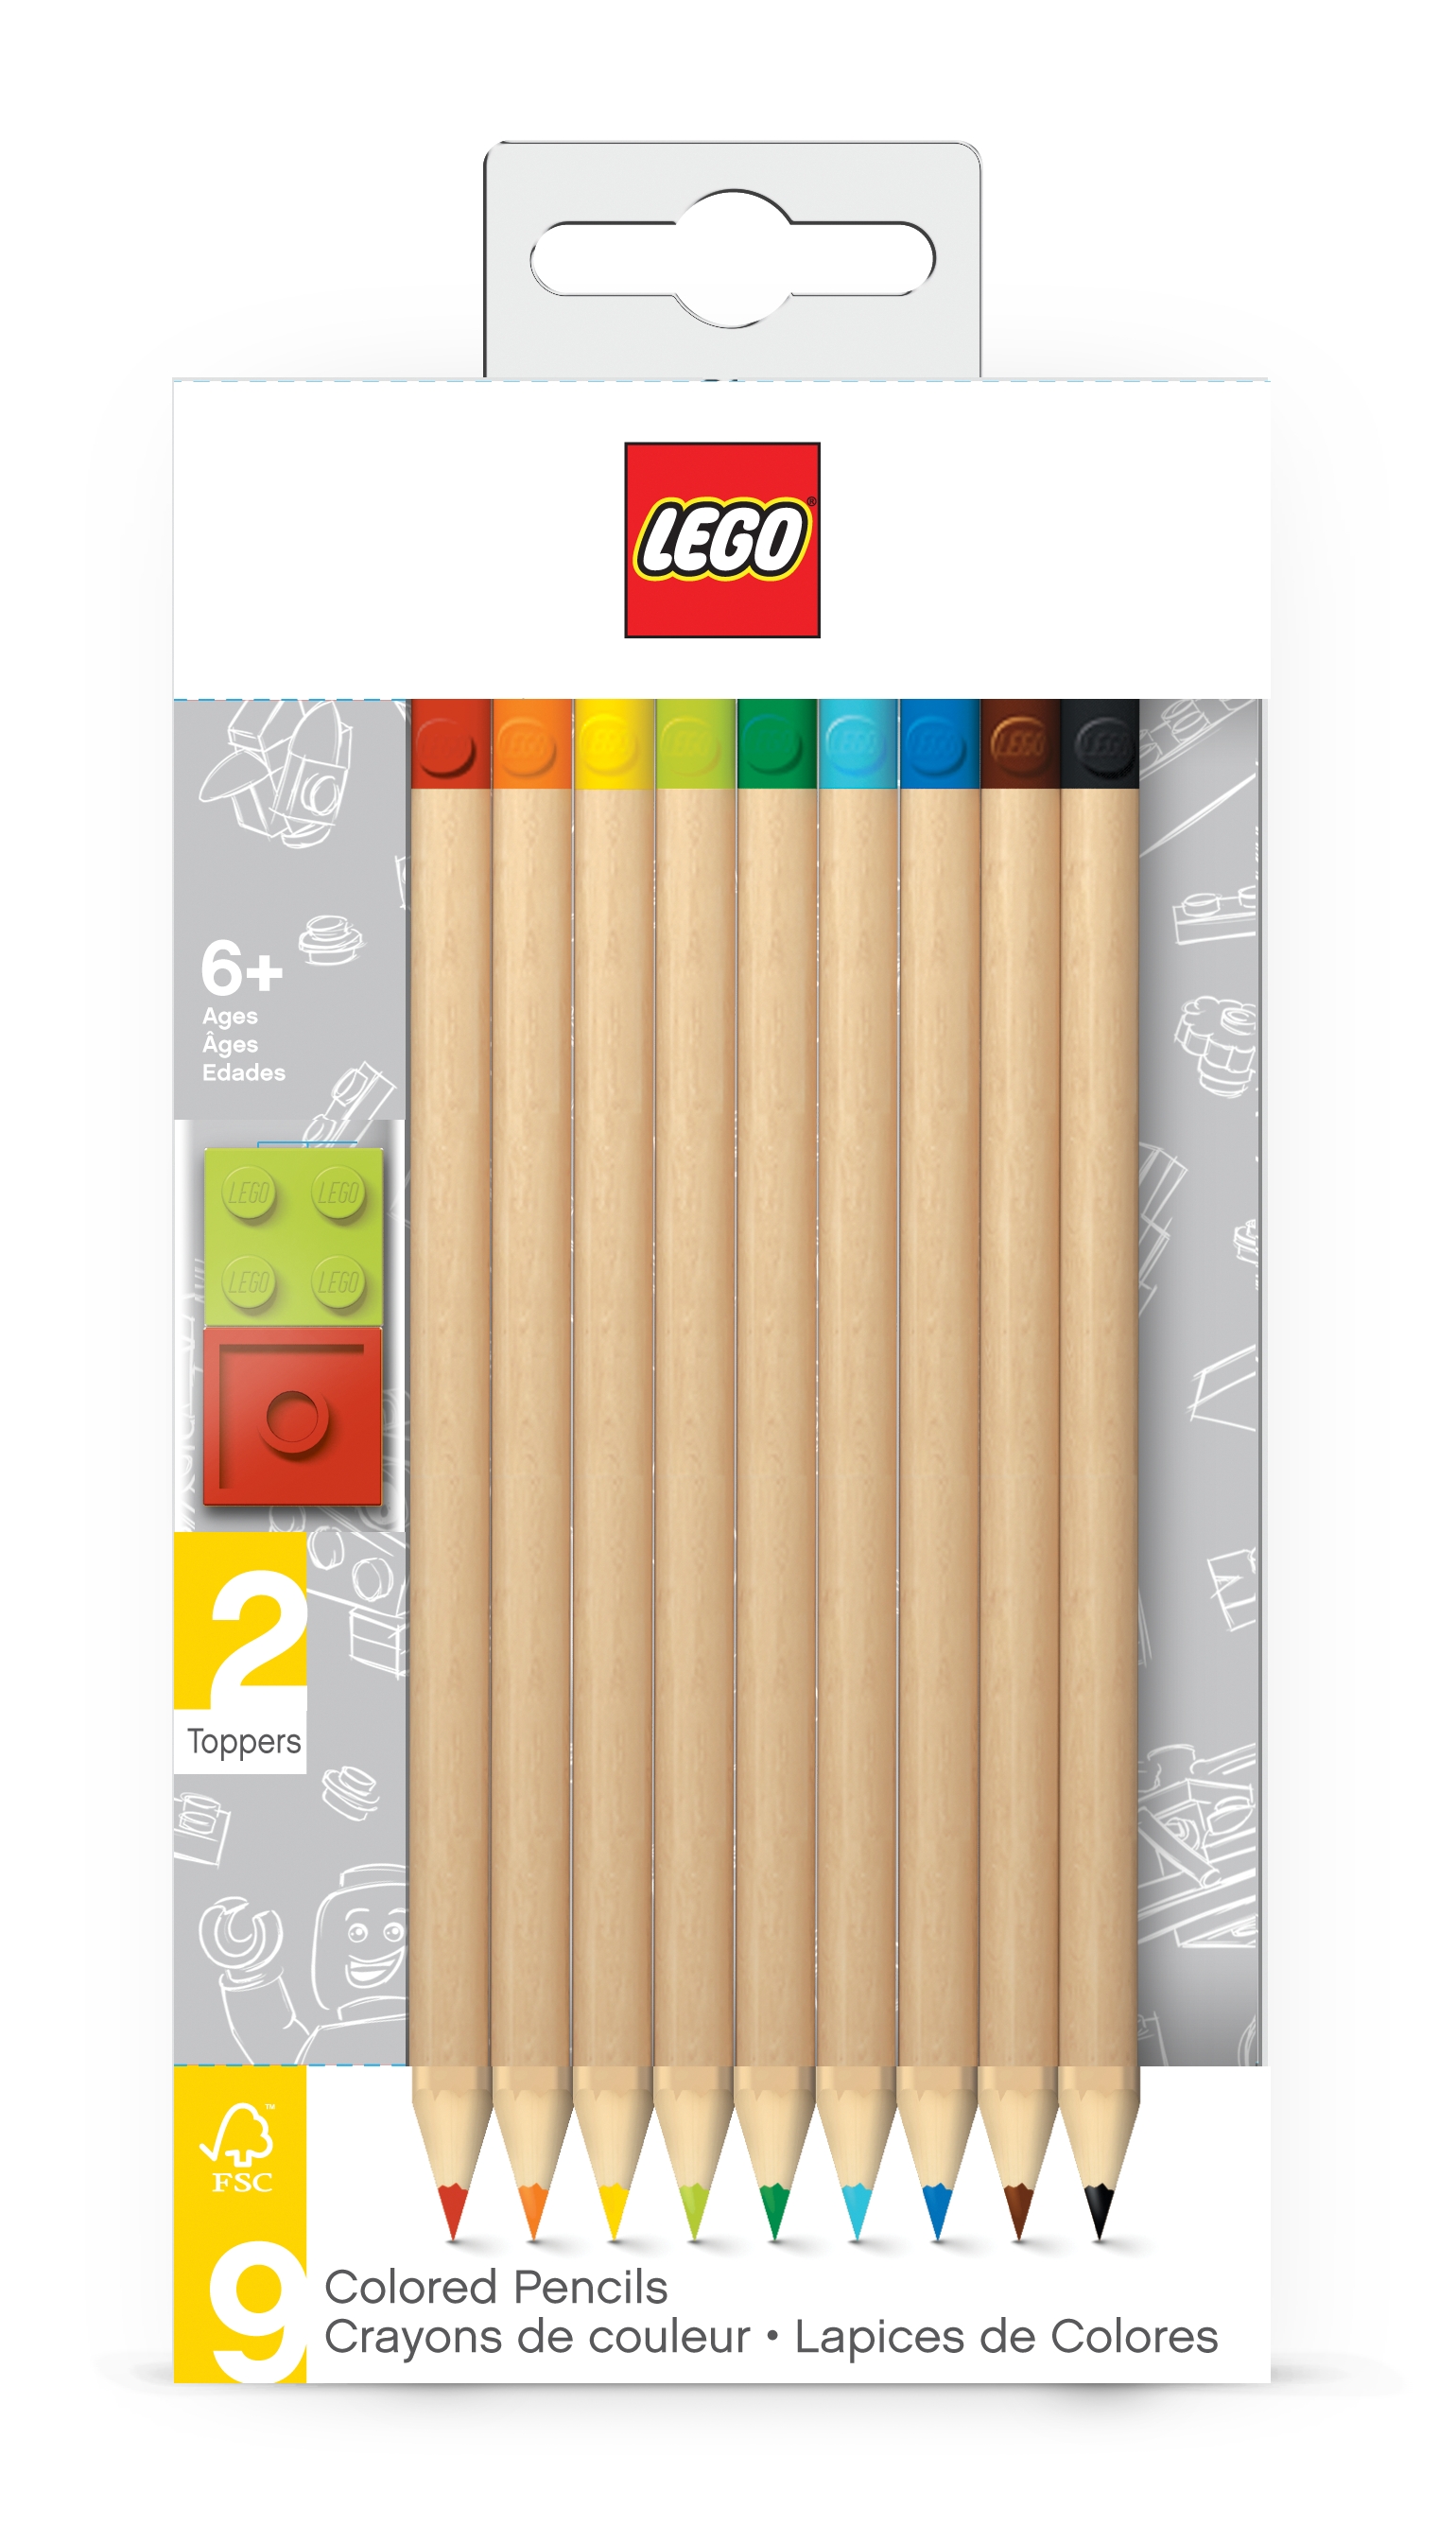 Details about   LEGO HB Graphite Pencil Set Pack of 9 Pencils School LEGO BLOCK Stationery 